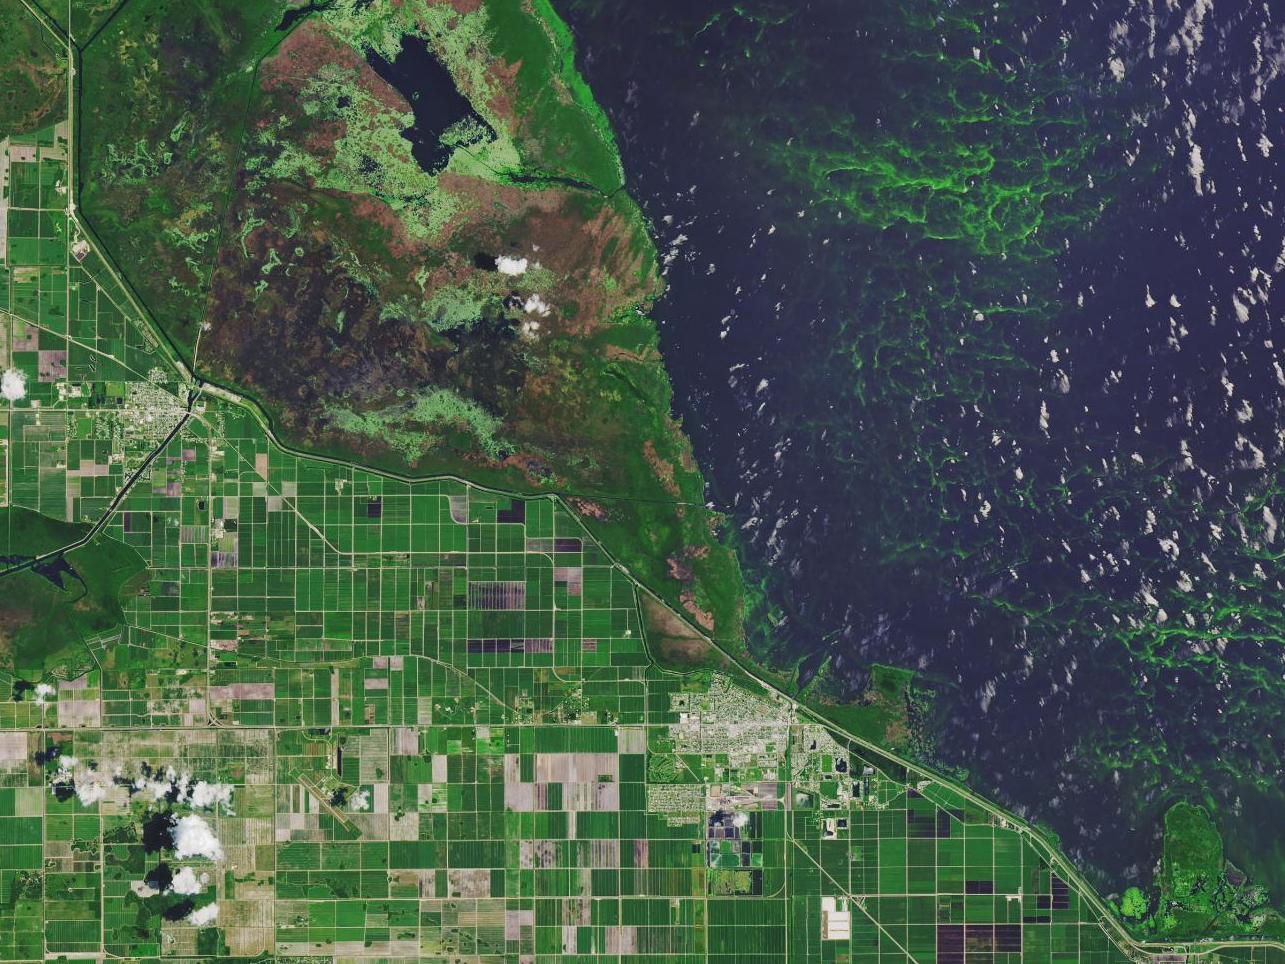 Toxic algal blooms resulted in states of emergency being declared in Florida in 2016 and 2018. Pictured is Lake Okeechobee